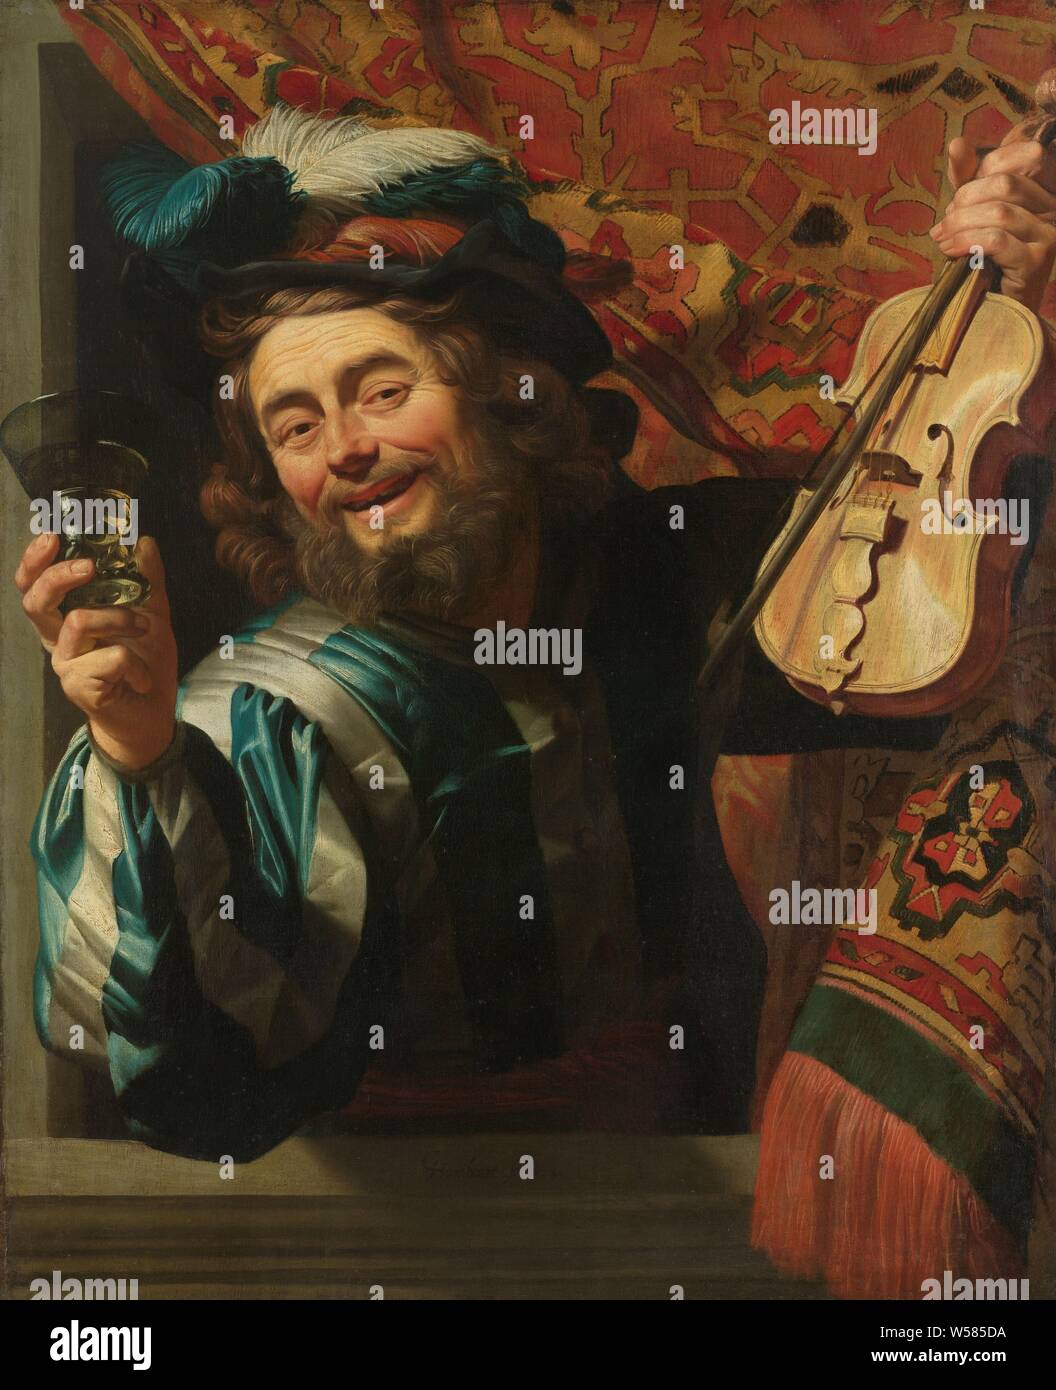 The Merry Fiddler The Merry Fiddler Merry Violinist with Wineglass, A cheerful violin player holding a birch ant. A smiling man leans out of a window with an Eastern rug hanging. In the right hand a birch meier with wine holds up, in the left hand a violin with bow. On the head a hat with feathers, violin, fiddle, laughing, glass or wine, Gerard van Honthorst, 1623, canvas, oil paint (paint), support: h 107.2 cm × w 88.3 cm Stock Photo